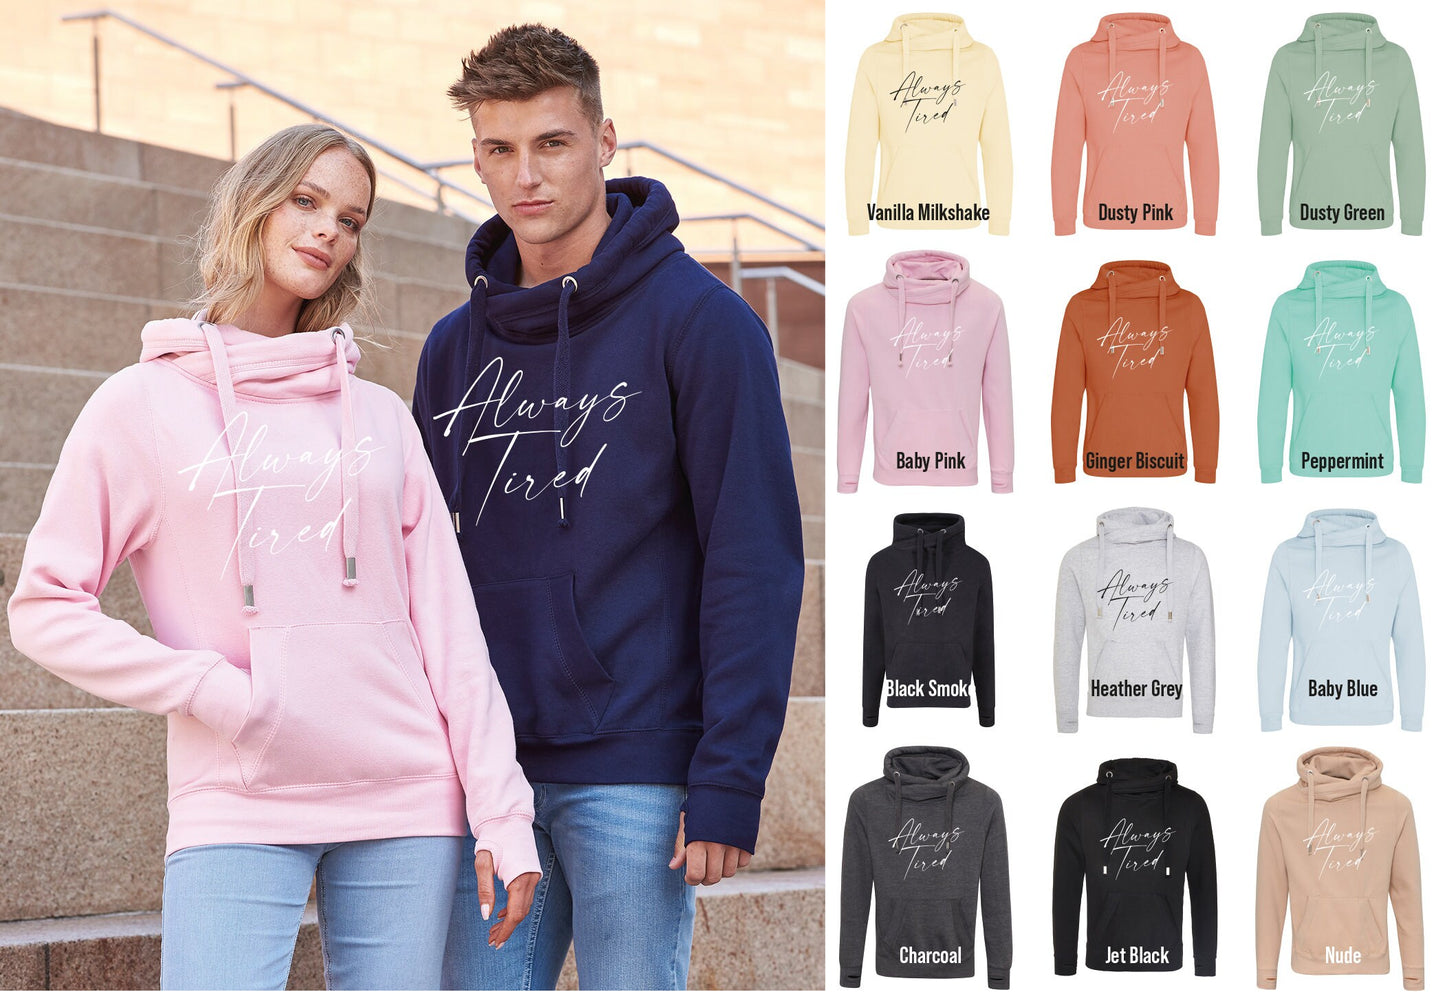 Always Tired B Cross Neck Hoodie JH021 - Cool Funny Jumper Hooded Top Birthday Mother's Day Christmas | Cowl Neck Hoodie